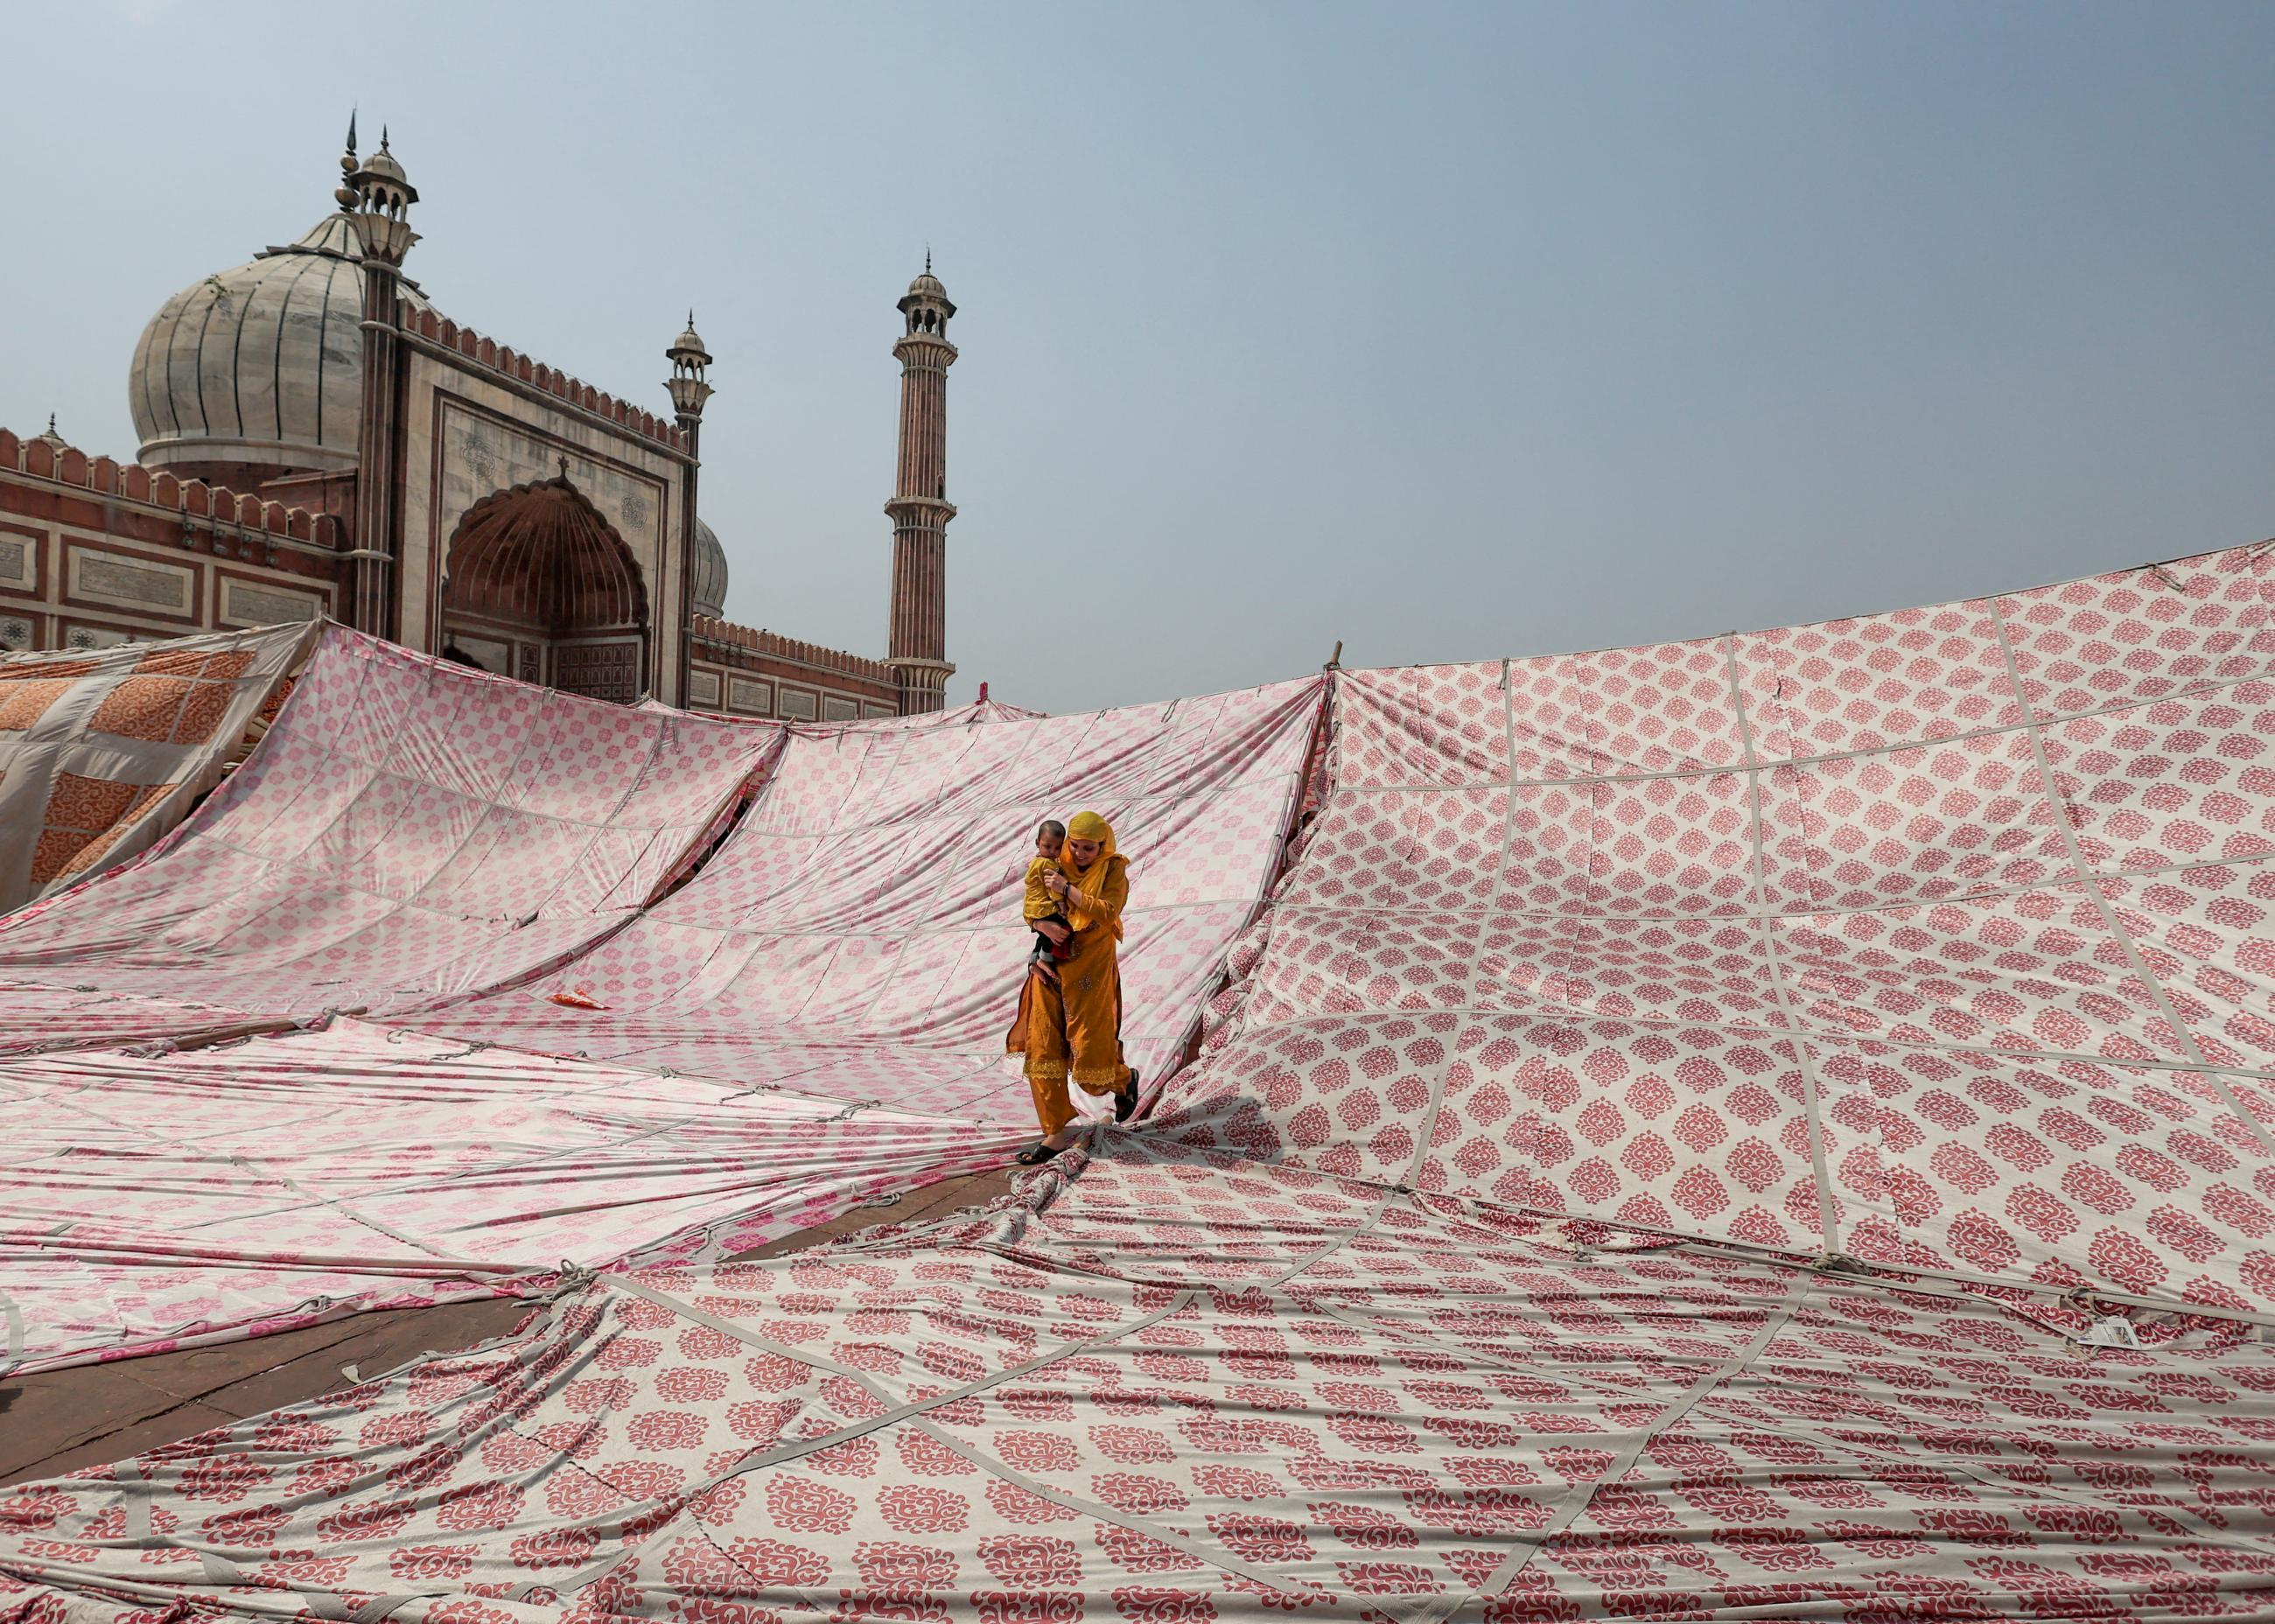 A Muslim woman and child leave after offering prayers during Jumat-ul-Vida, the last Friday of the holy fasting month of Ramadan, at Jama Masjid in the old quarters of Delhi, India, April 29, 2022. 